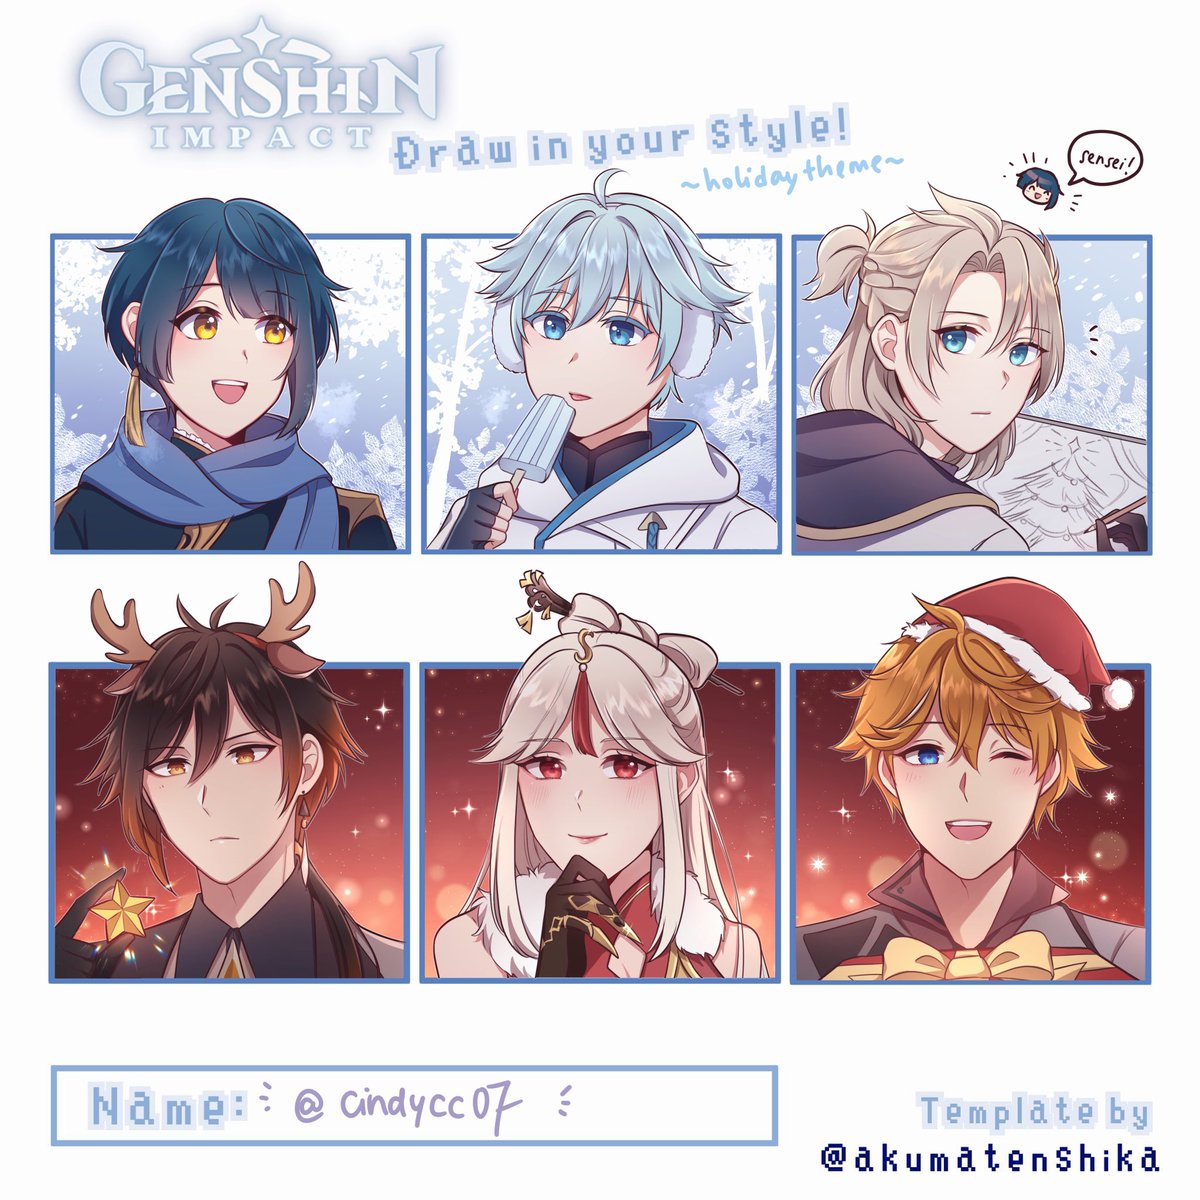 Cc Genshin Impact Draw In Your Style Holiday Version Chongyun And Xingqiu Is Heading To Dragonspine To Meet Albedo Meanwhile Zhongli Ningguang And Childe Is Having Christmas Party